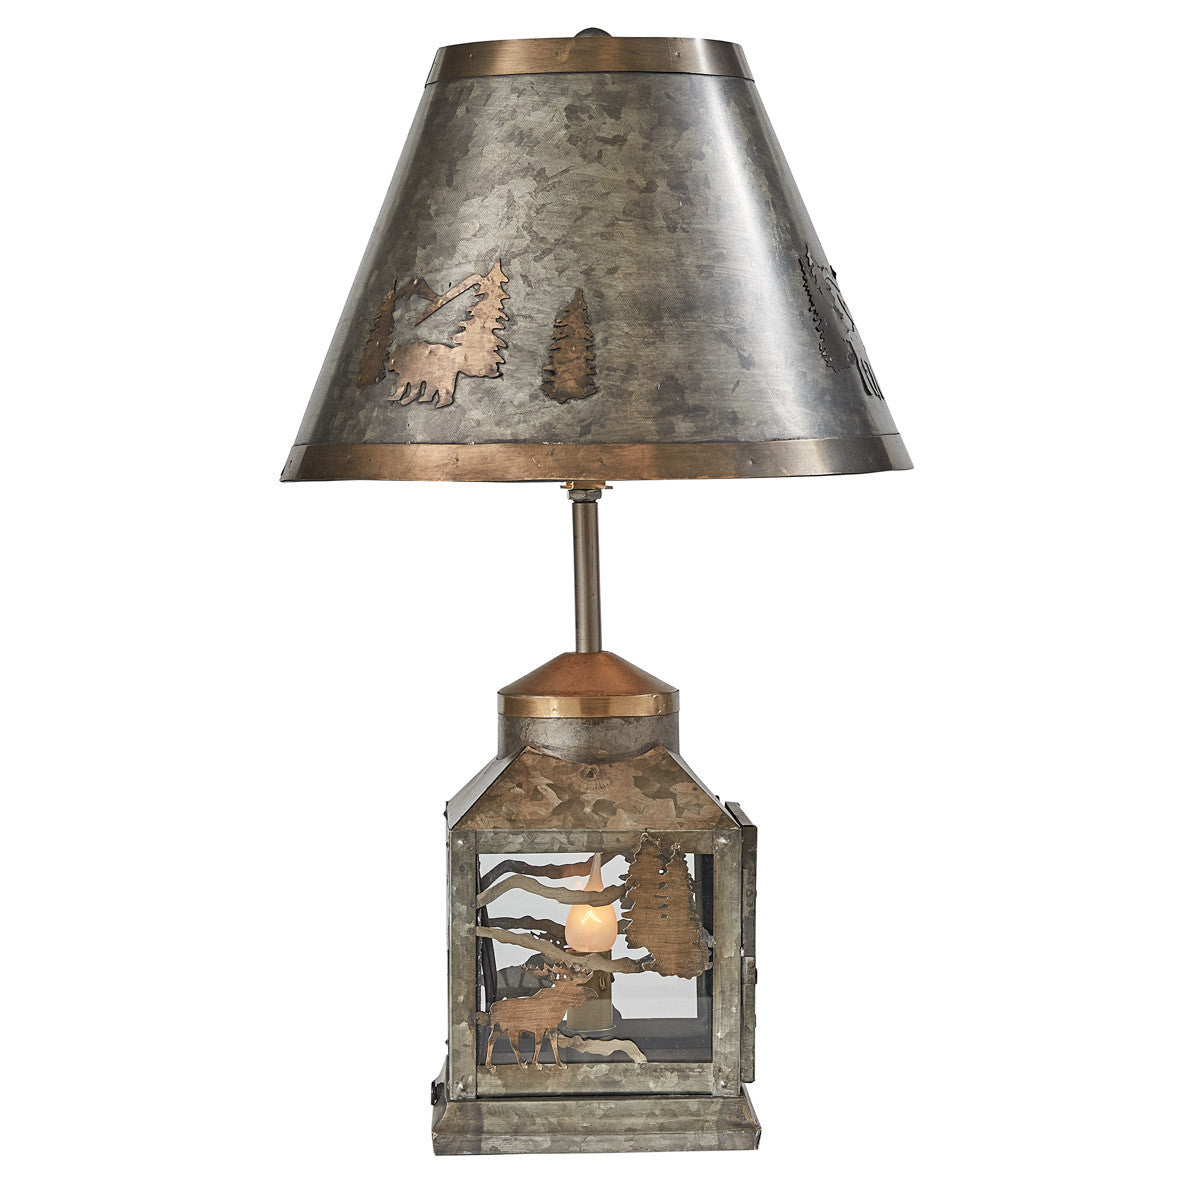 Forester'S Lantern Lamp With Shade - Park Designs